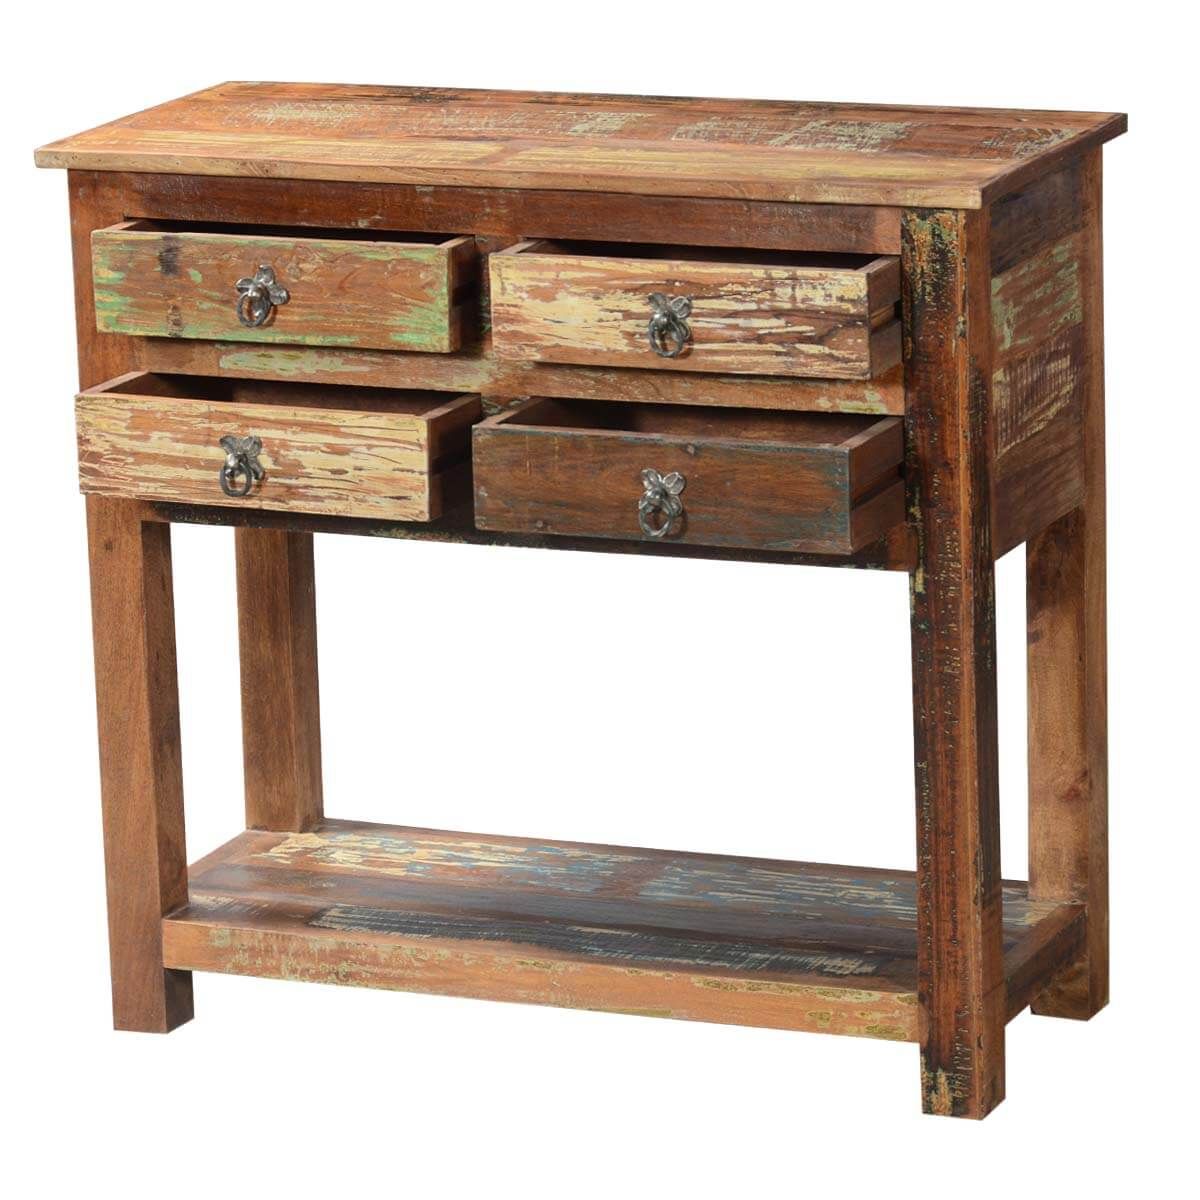 Ashland Rustic Reclaimed Wood 4 Drawer Hallway Console Table With Barnwood Console Tables (View 2 of 20)